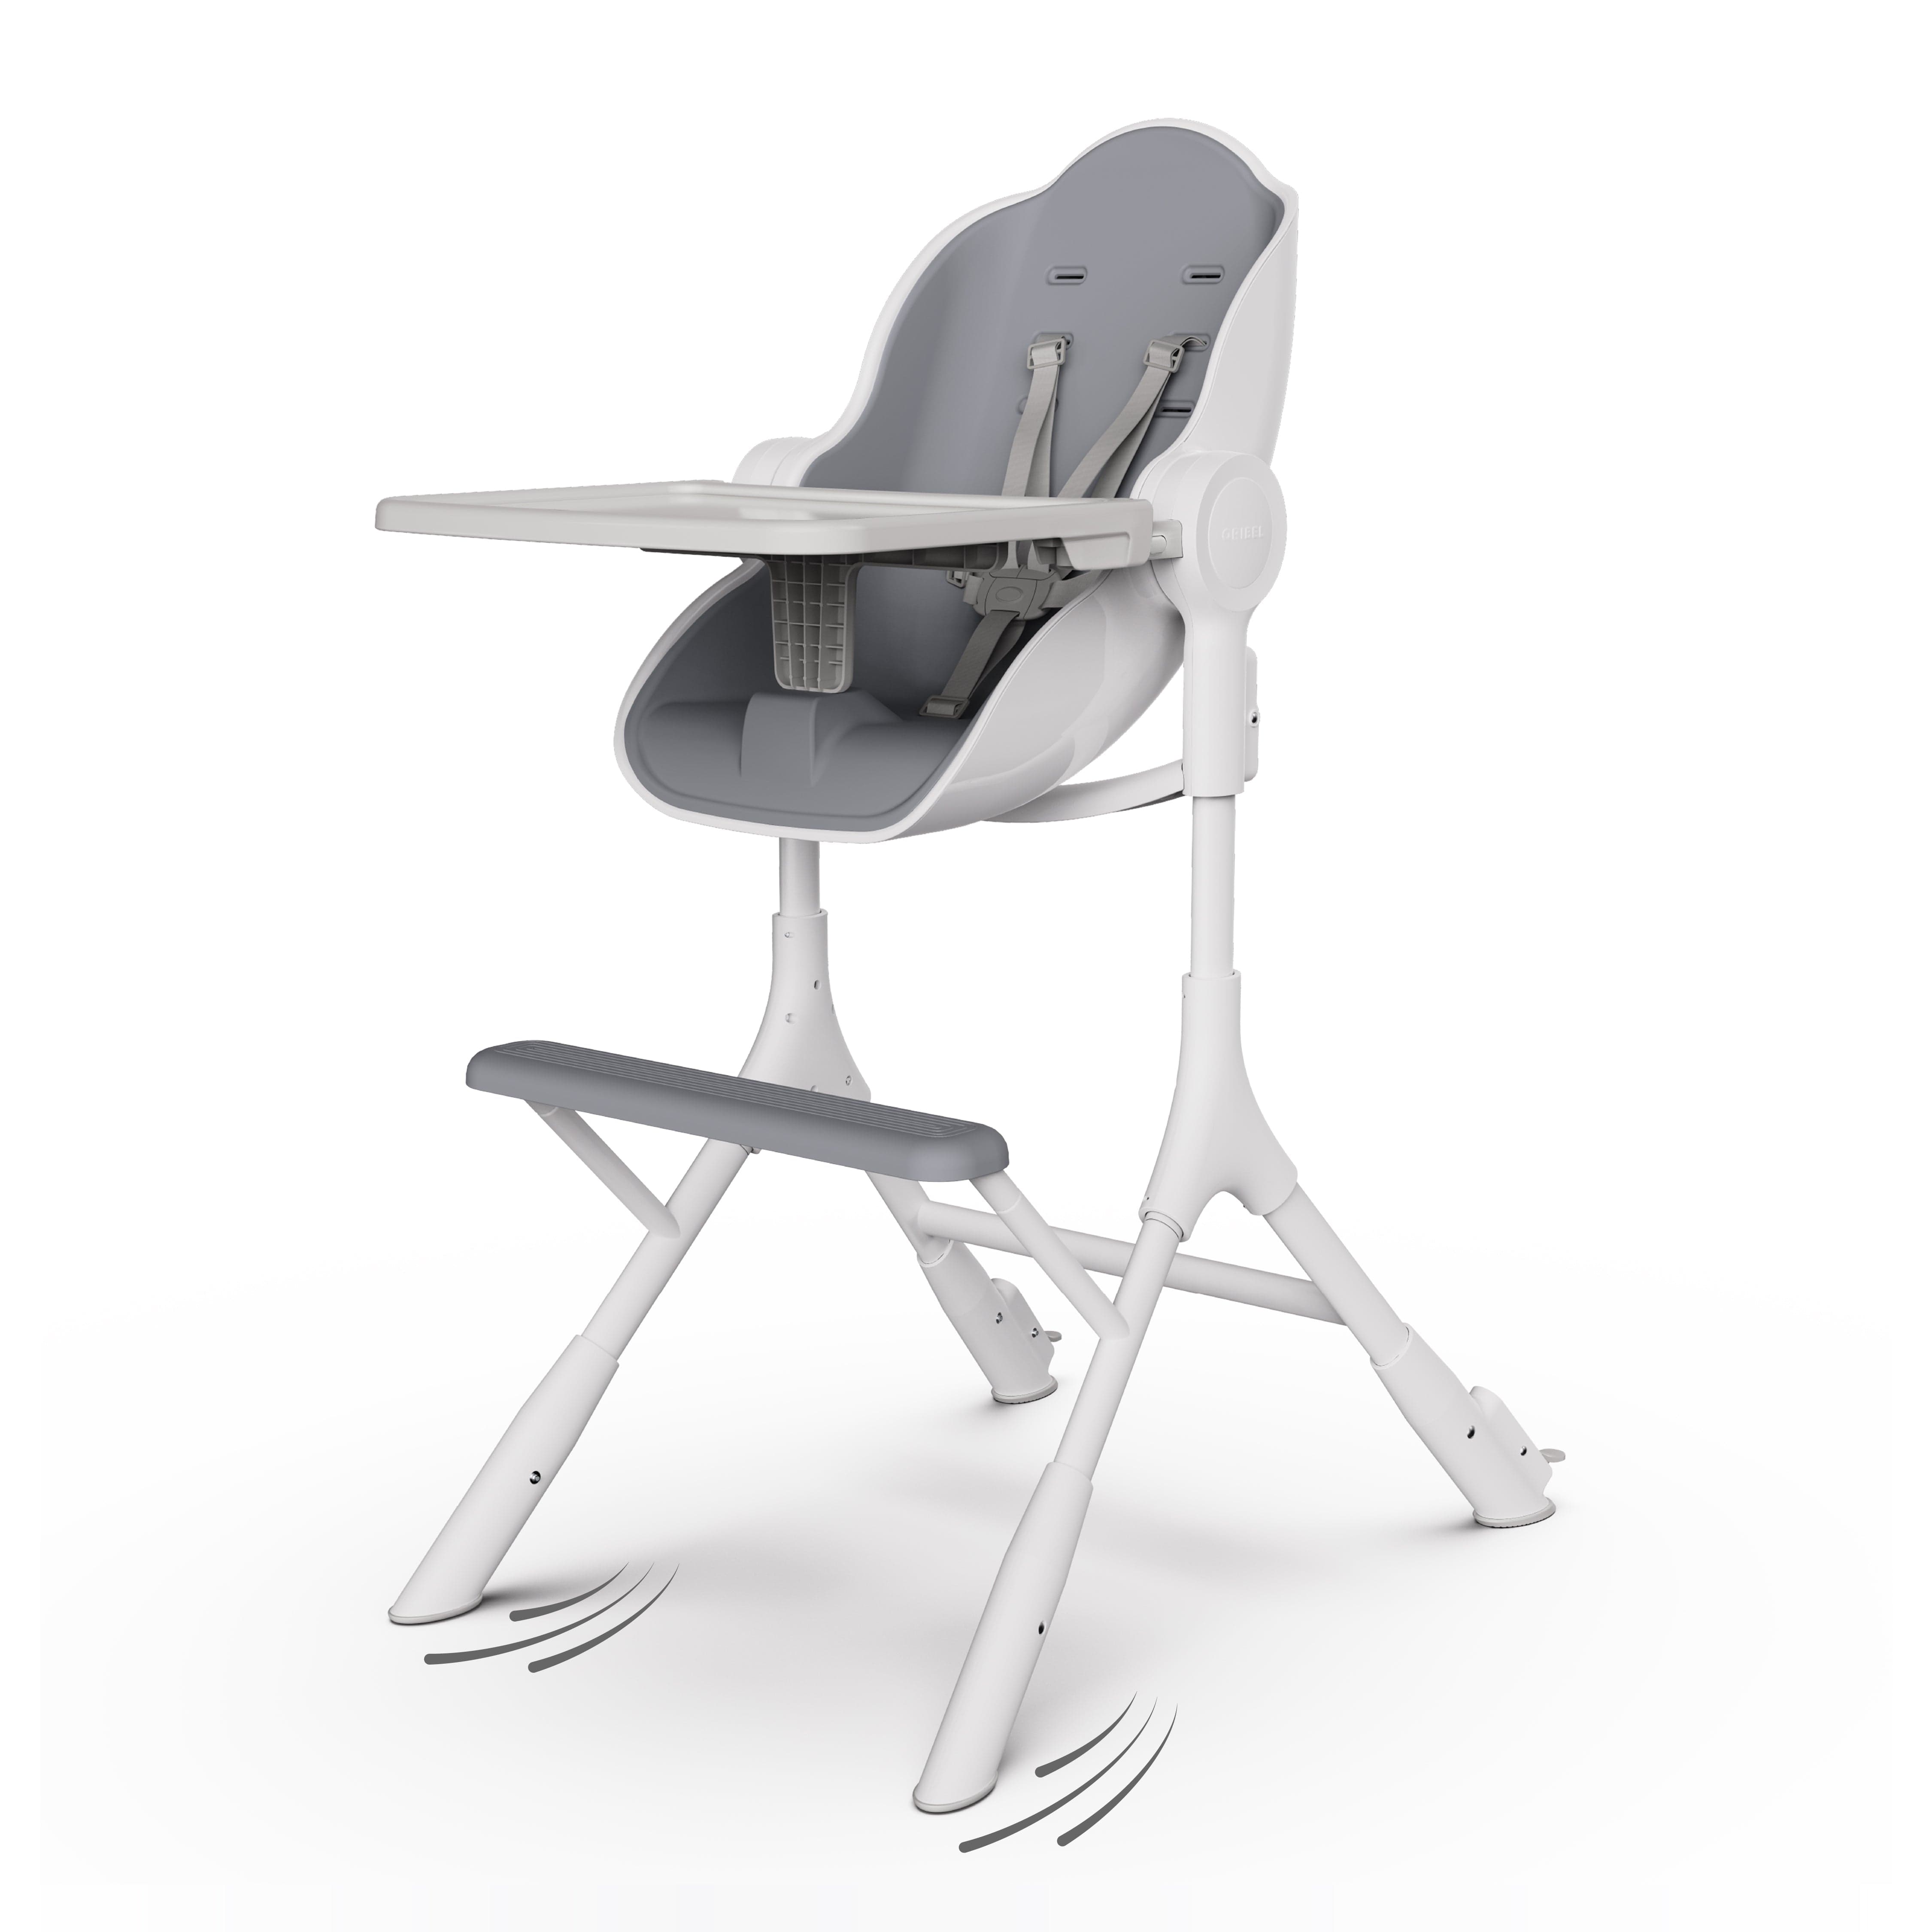 Stylish and Practical: Cocoon Z High Chair | Lounger in Avocado Green